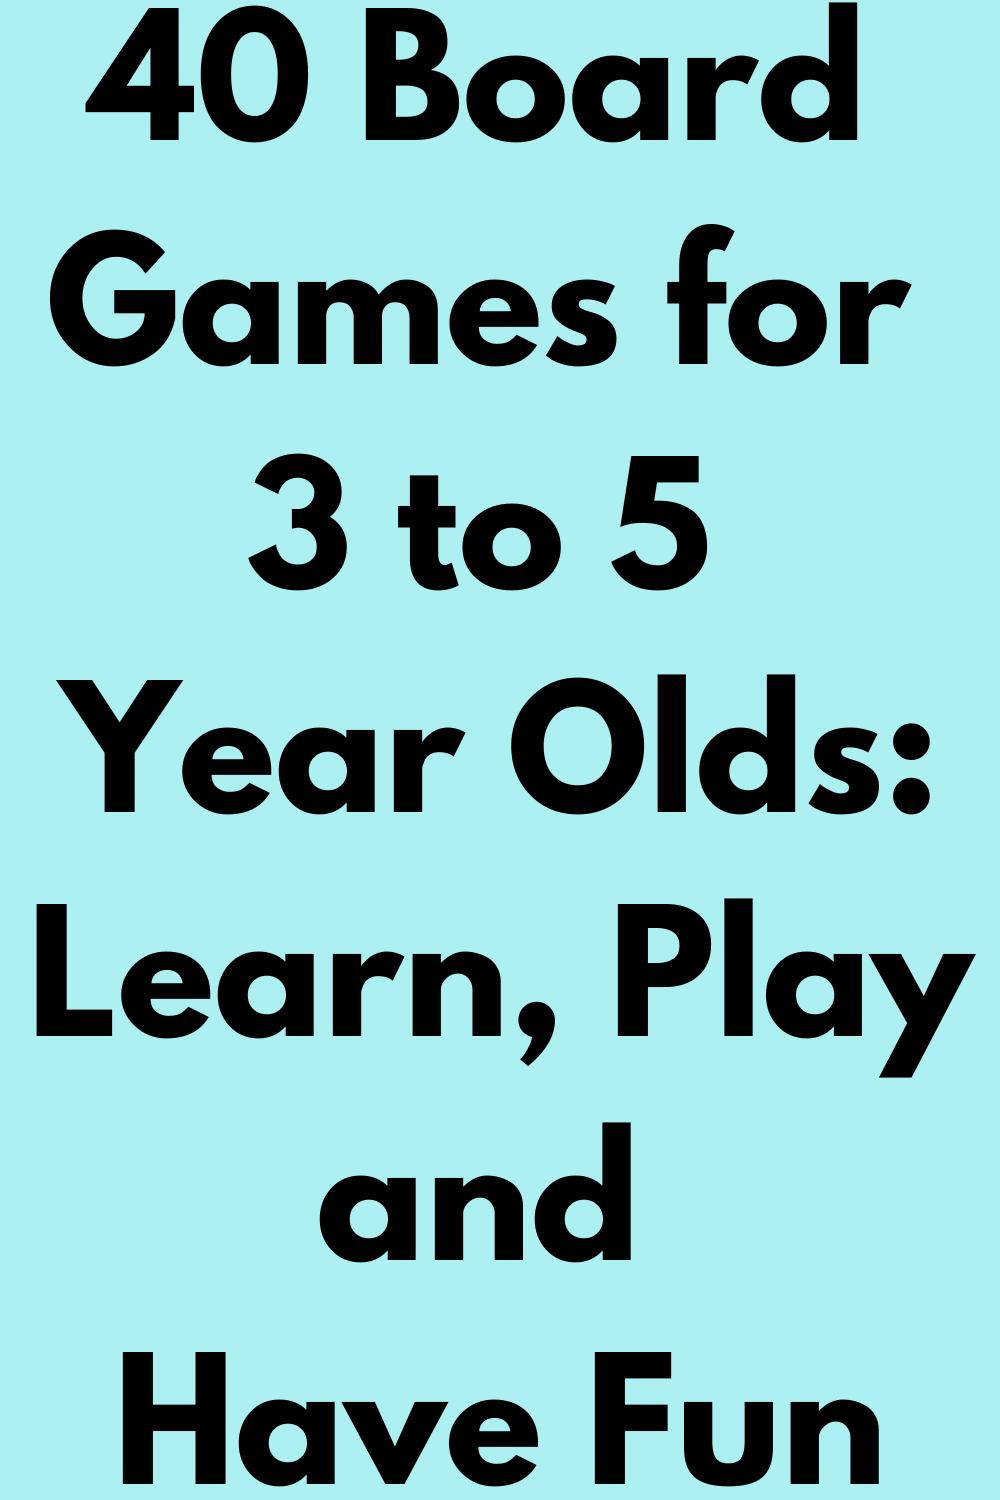 40 Board Games for 3 to 5 Year Olds